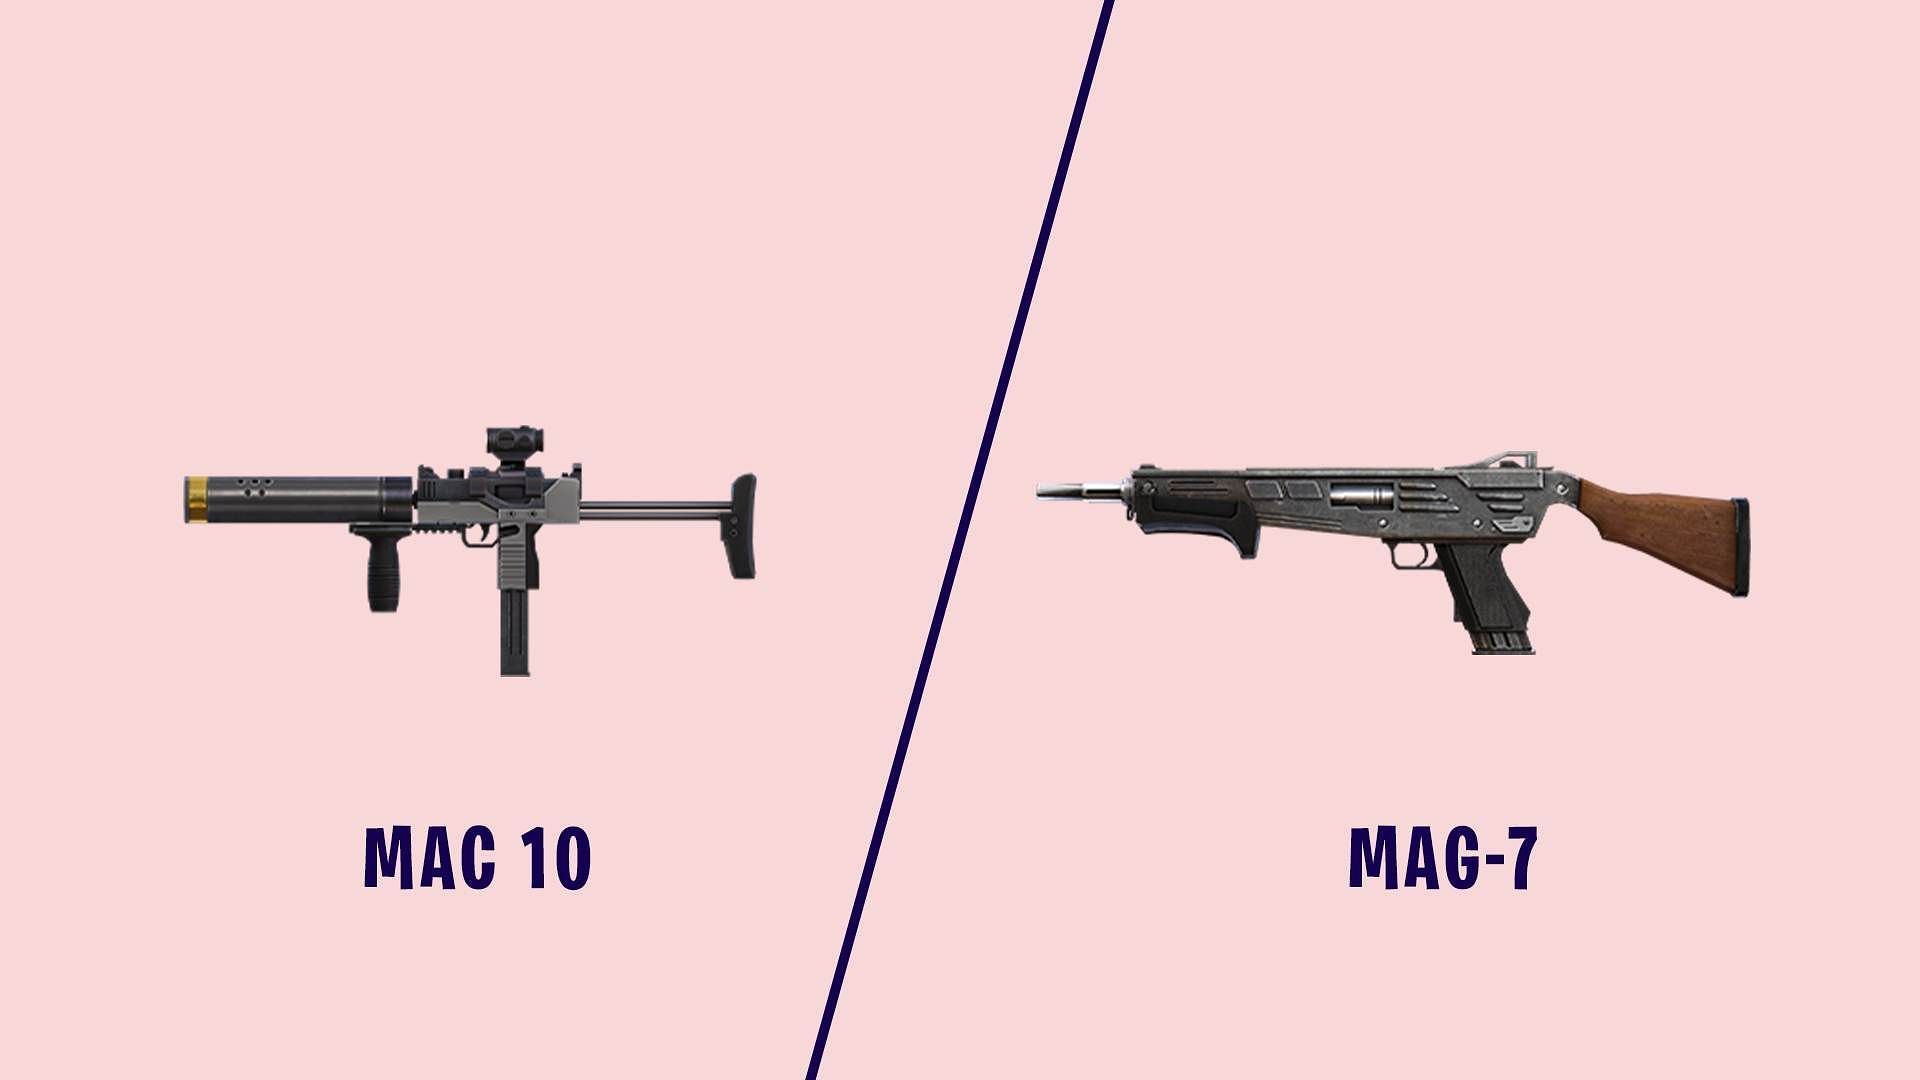 MAG-7 is the shotgun with highest rate of fire (Image via Sportskeeda)